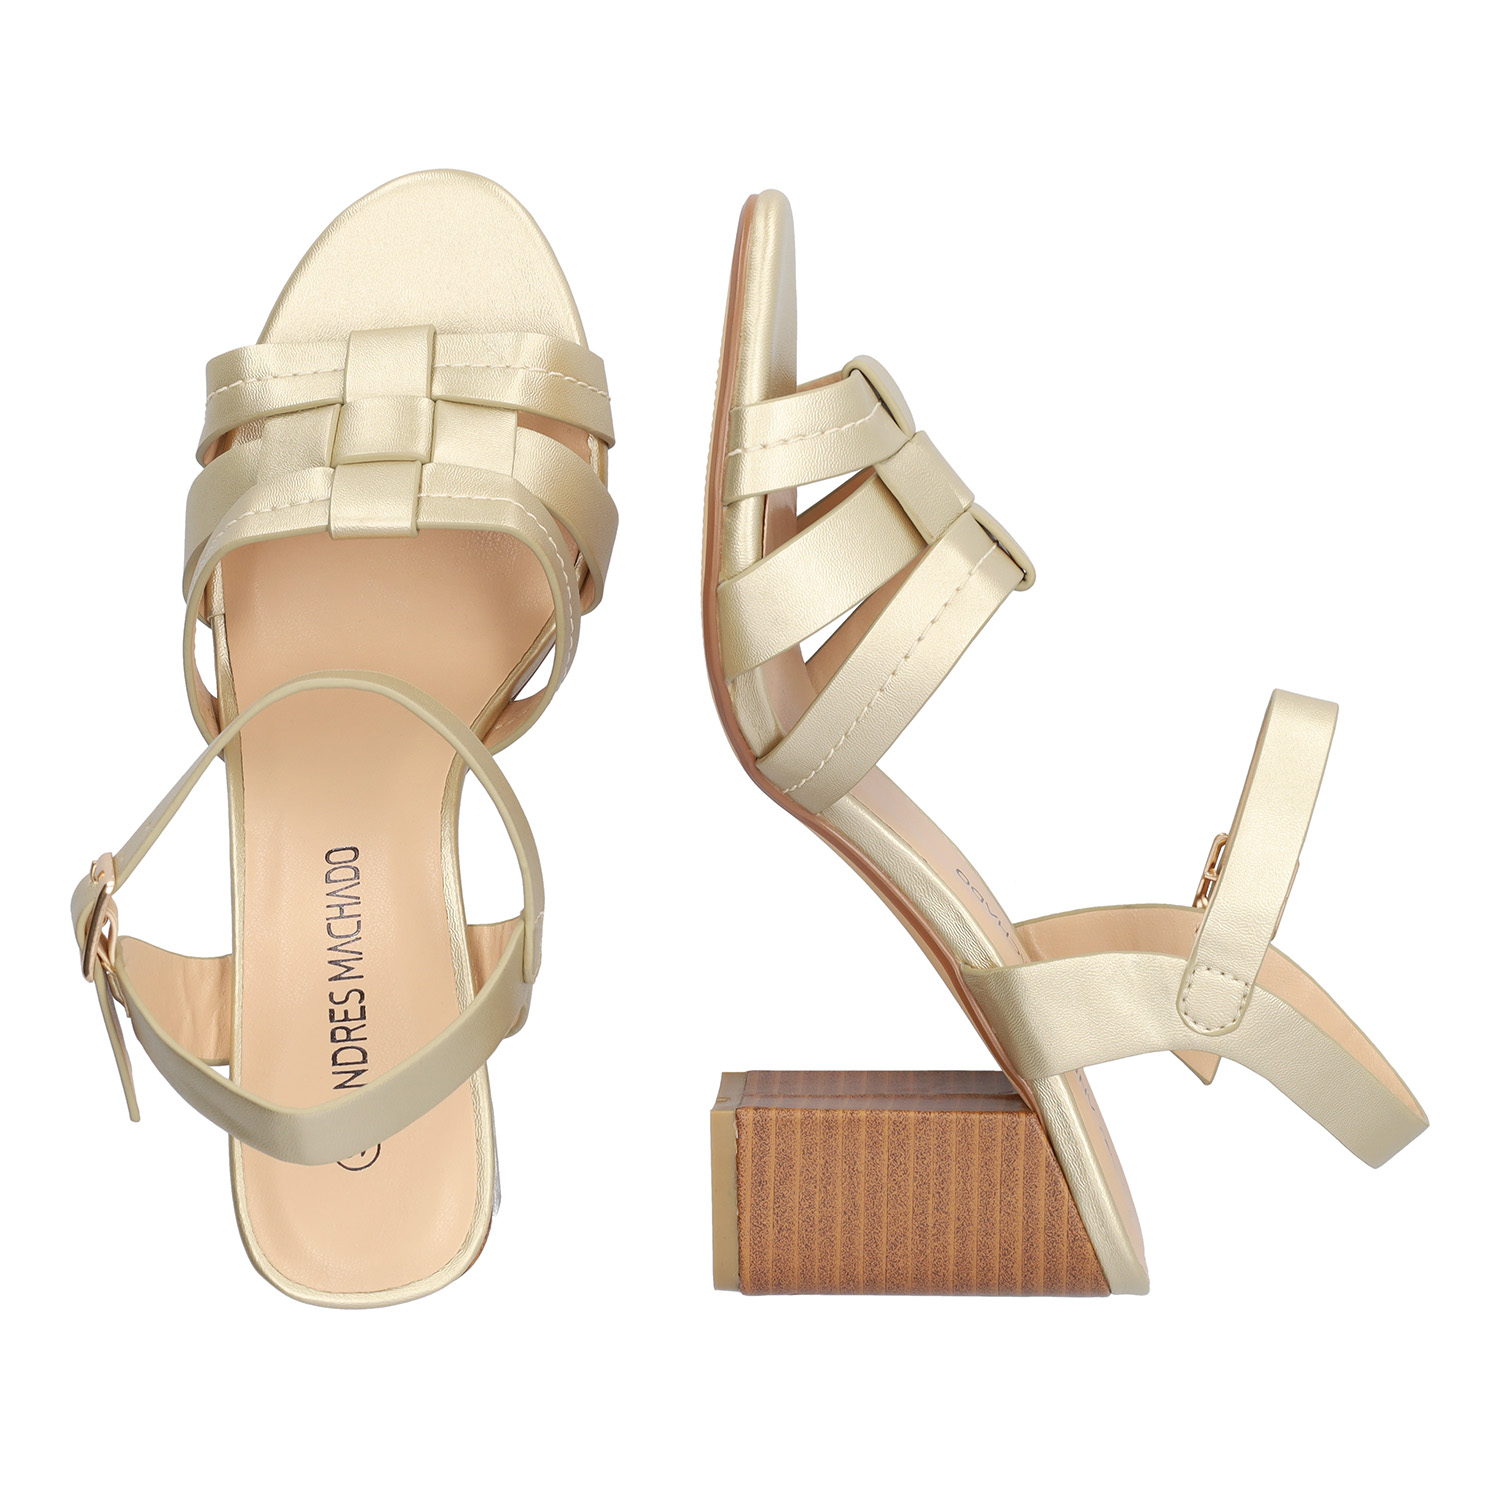 Soft golden colored sandals with squared heel 